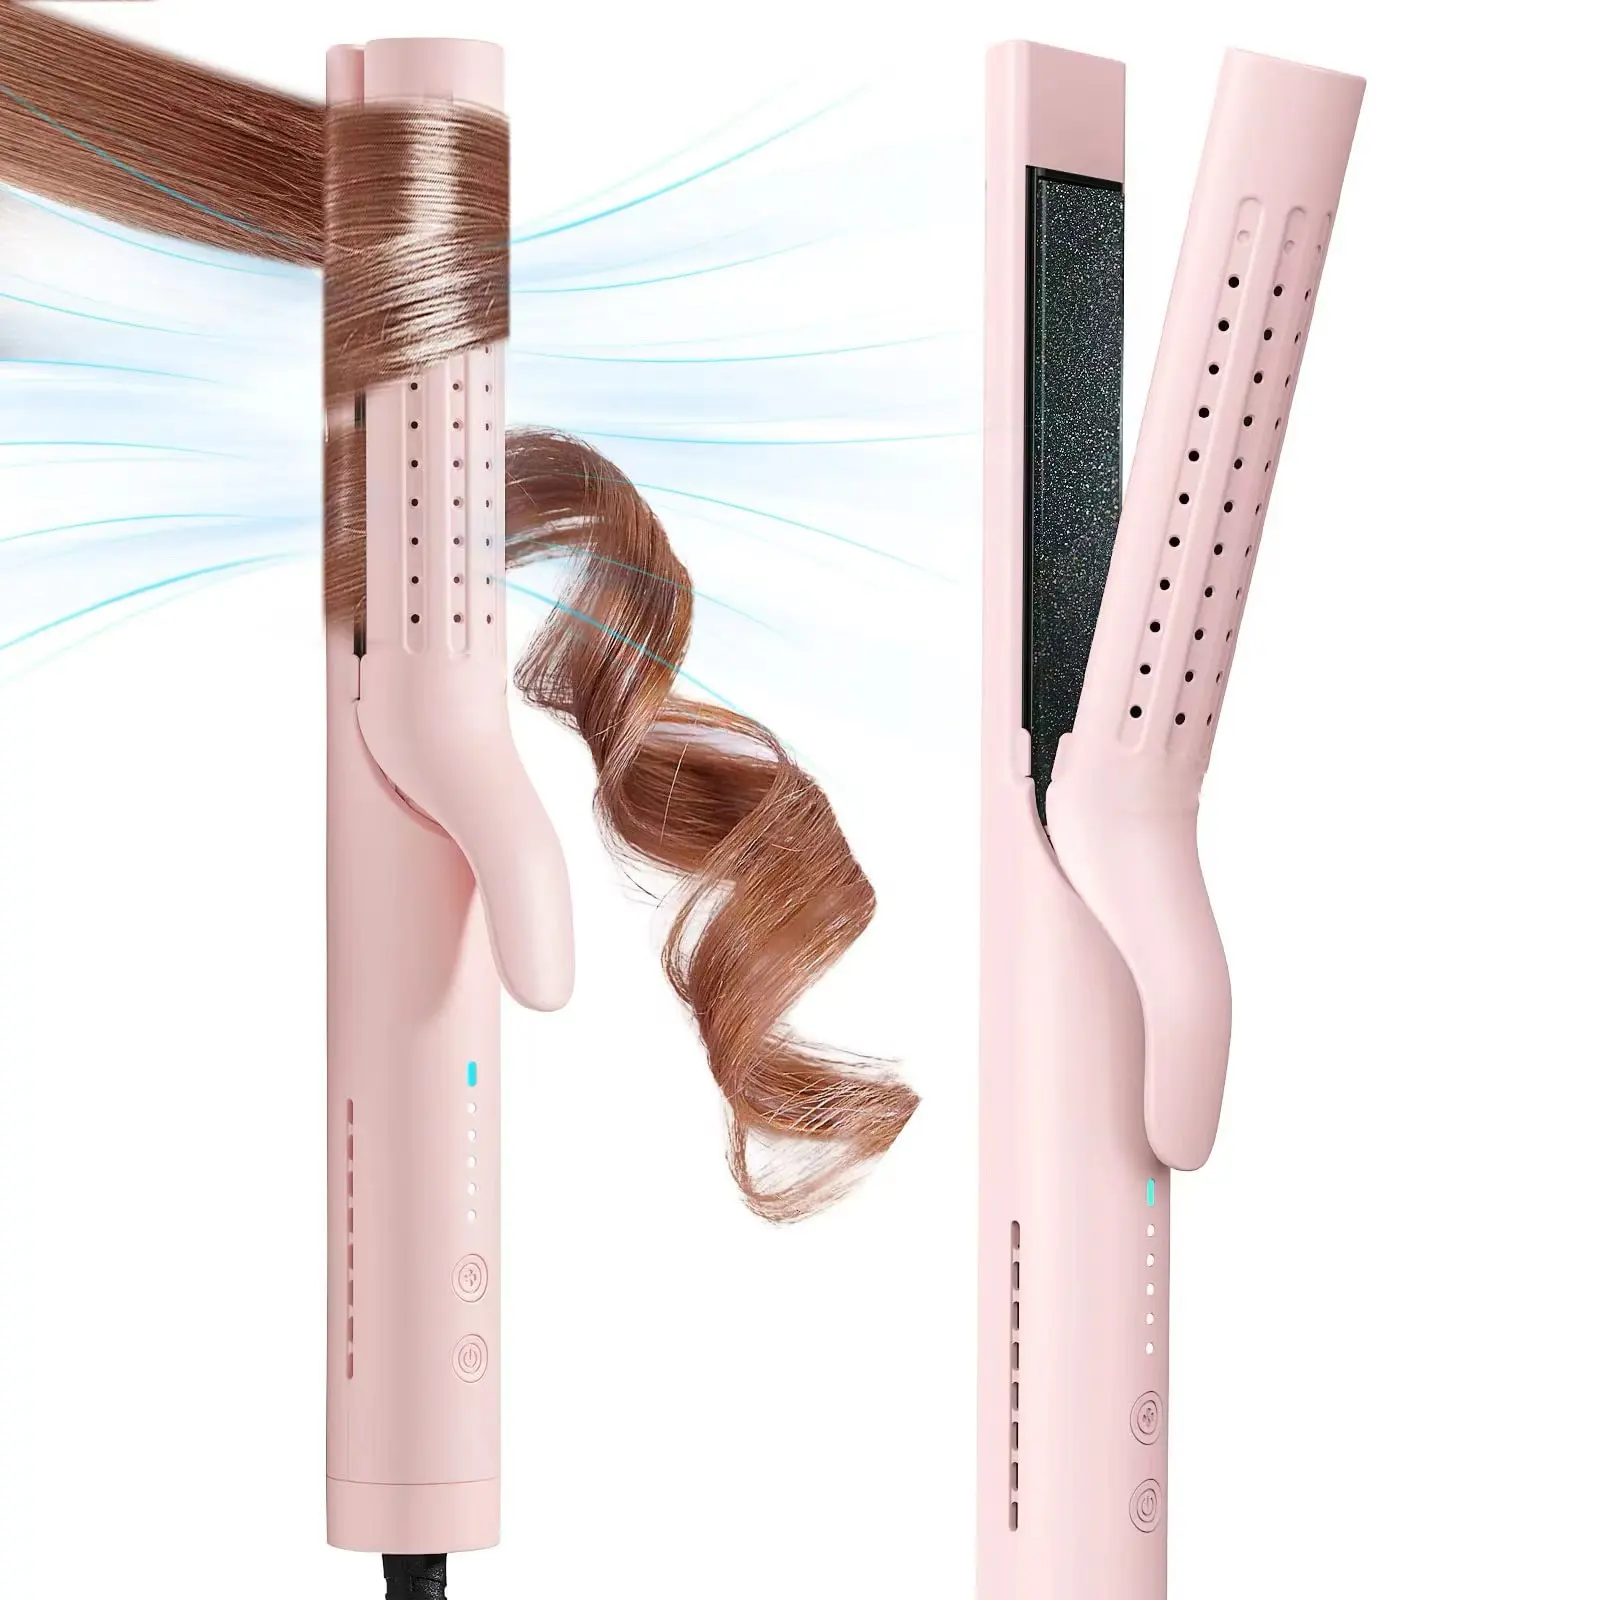 Curling Iron - 2 in 1 Cool Air Hair Iron Straightener and Curler 5 Adjustable Temps & Dual Voltage for All Hairstyles